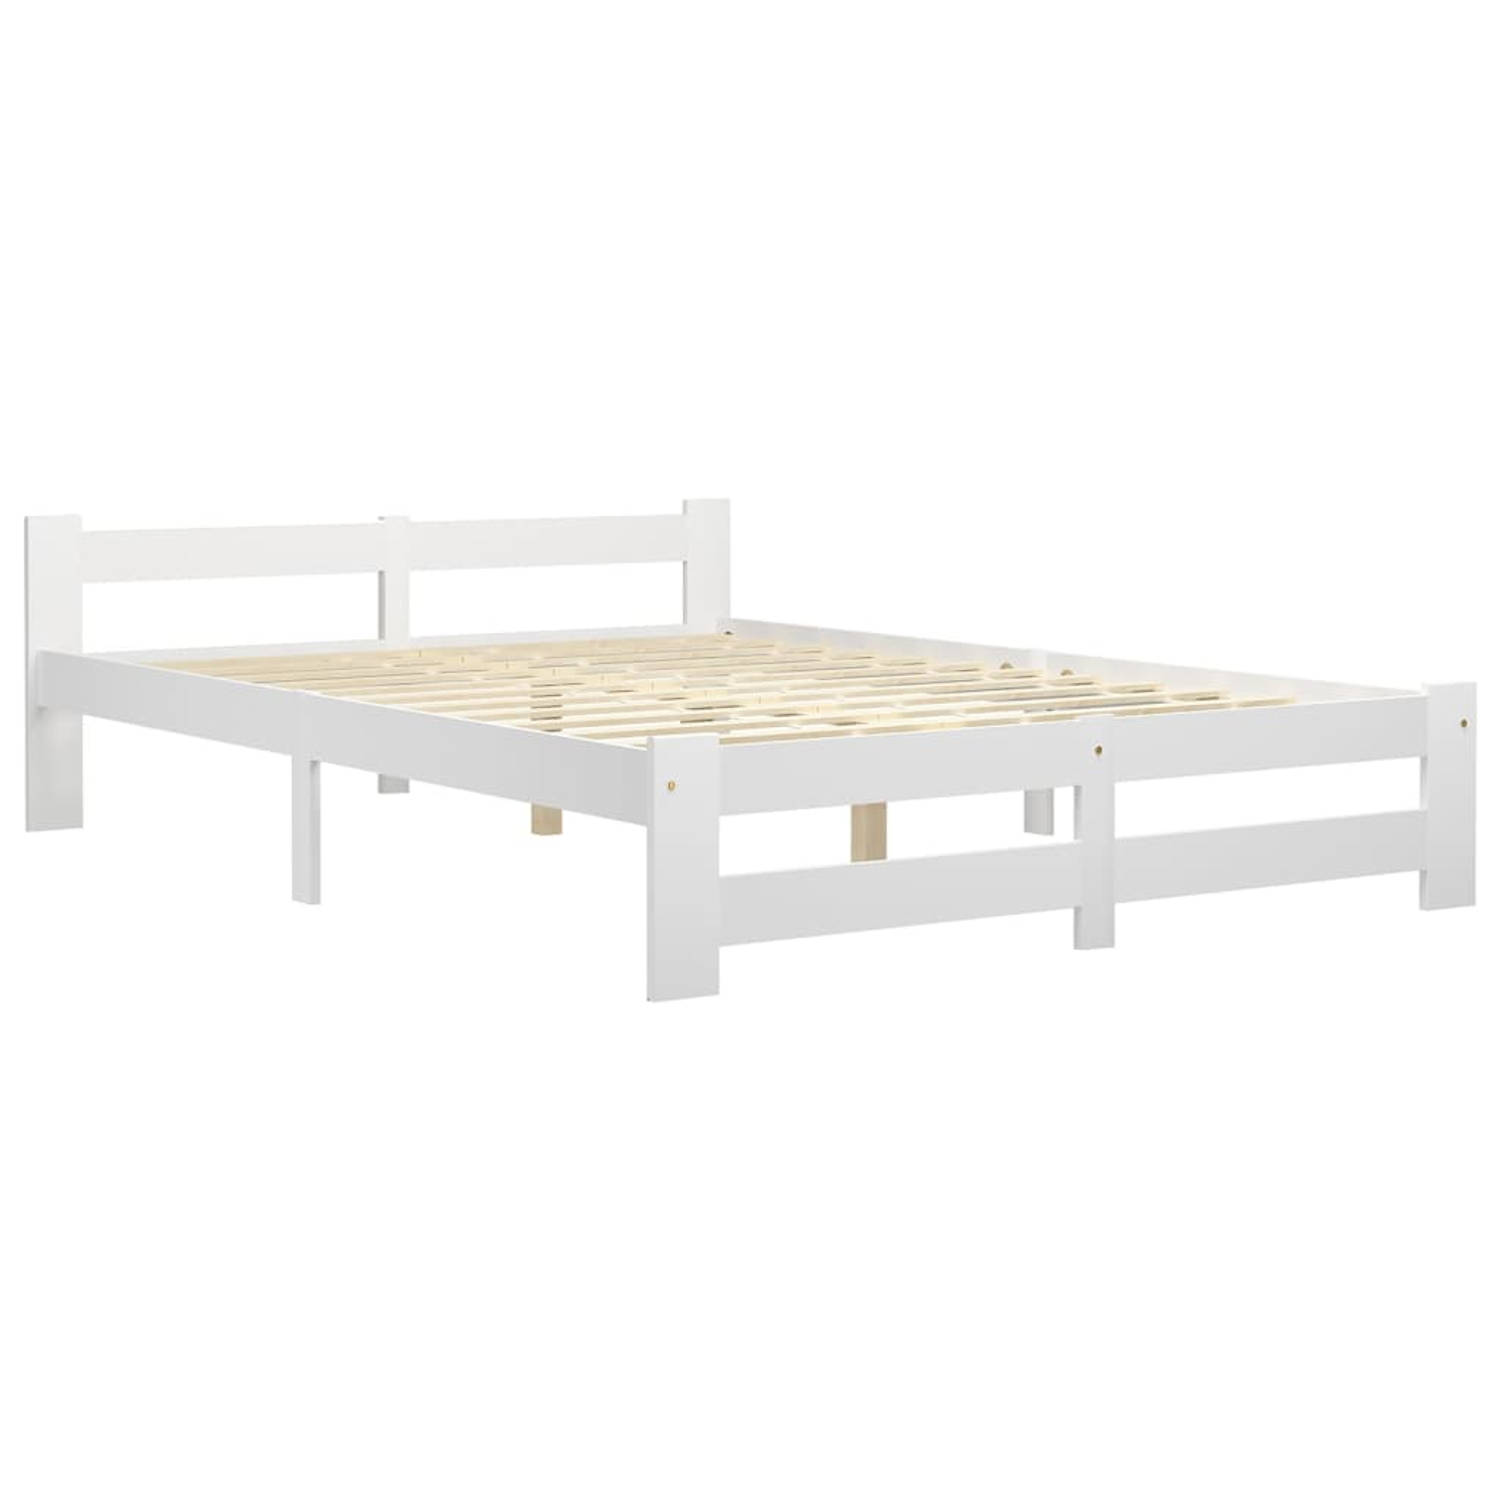 The Living Store Bedframe massief grenenhout wit 180x200 cm - Bedframe - Bedframes - Bed Frame - Bed Frames - Bed - Bedden - Houten Bedframe - Houten Bedframes - 2-persoonsbed - 2